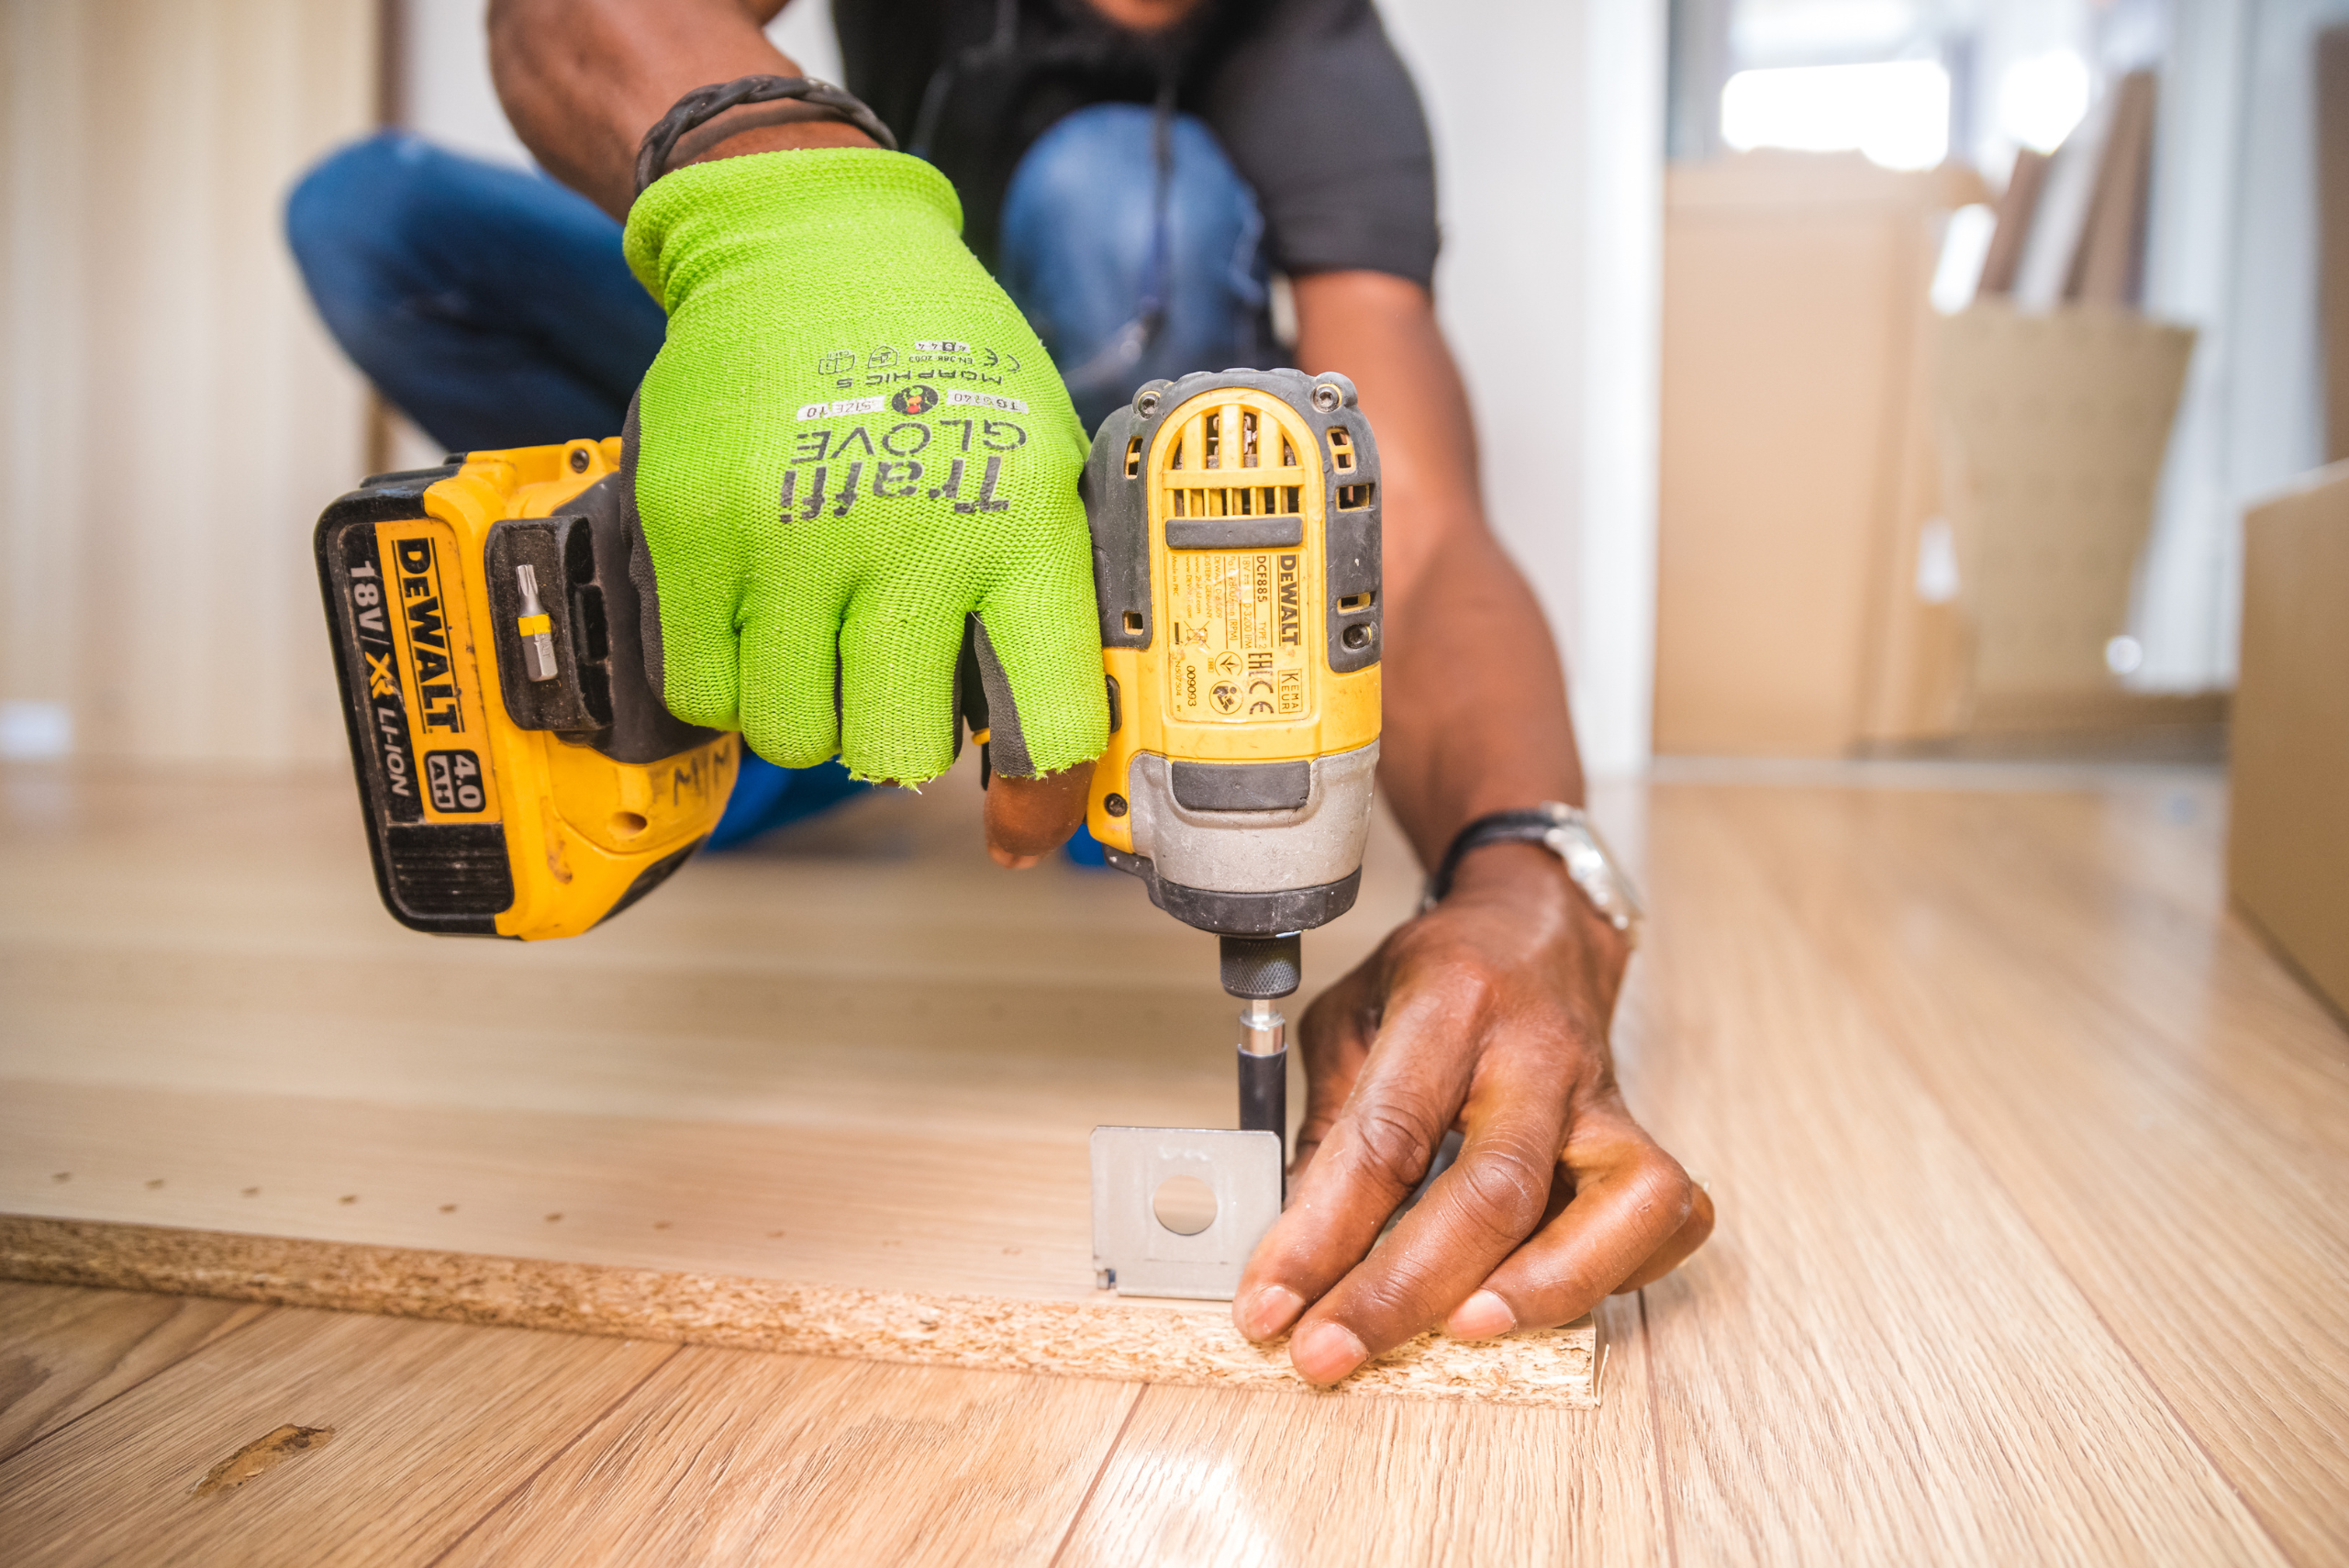 Person using impact driver to install screws.